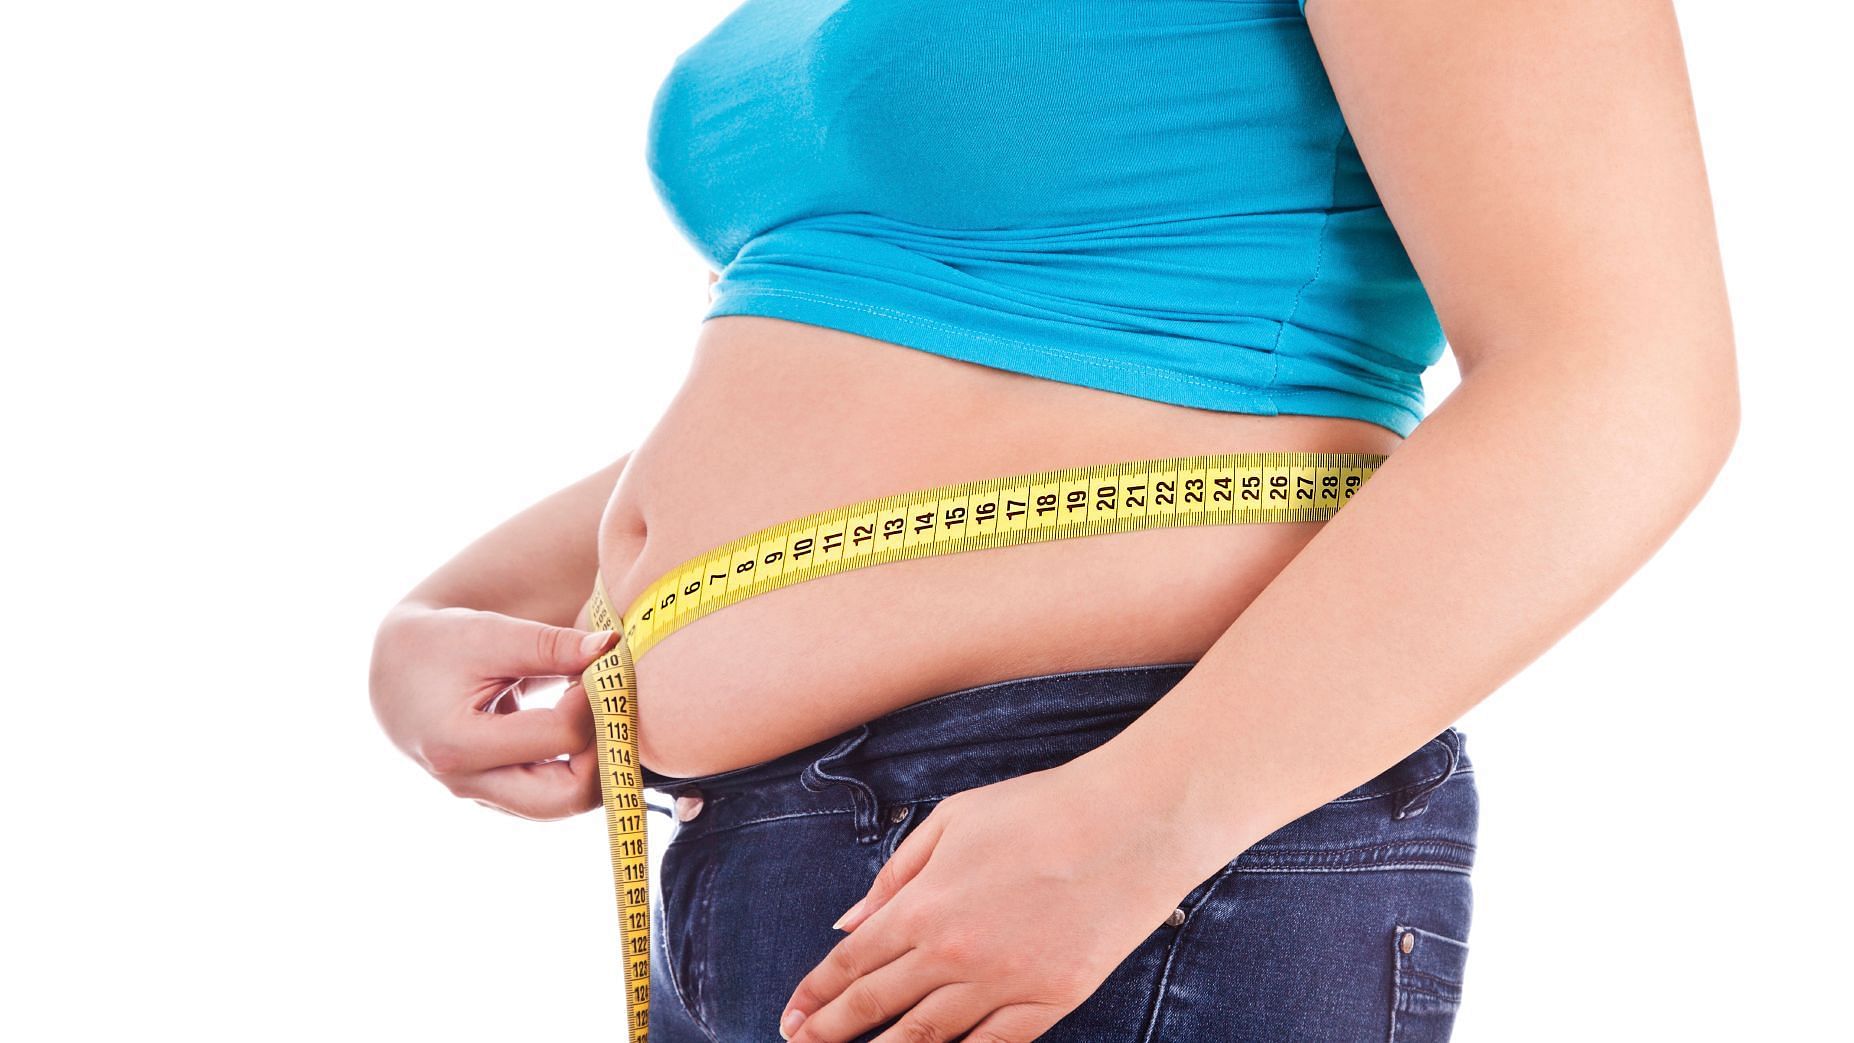 The study shows just how harmful carrying excess weight can be to human health.